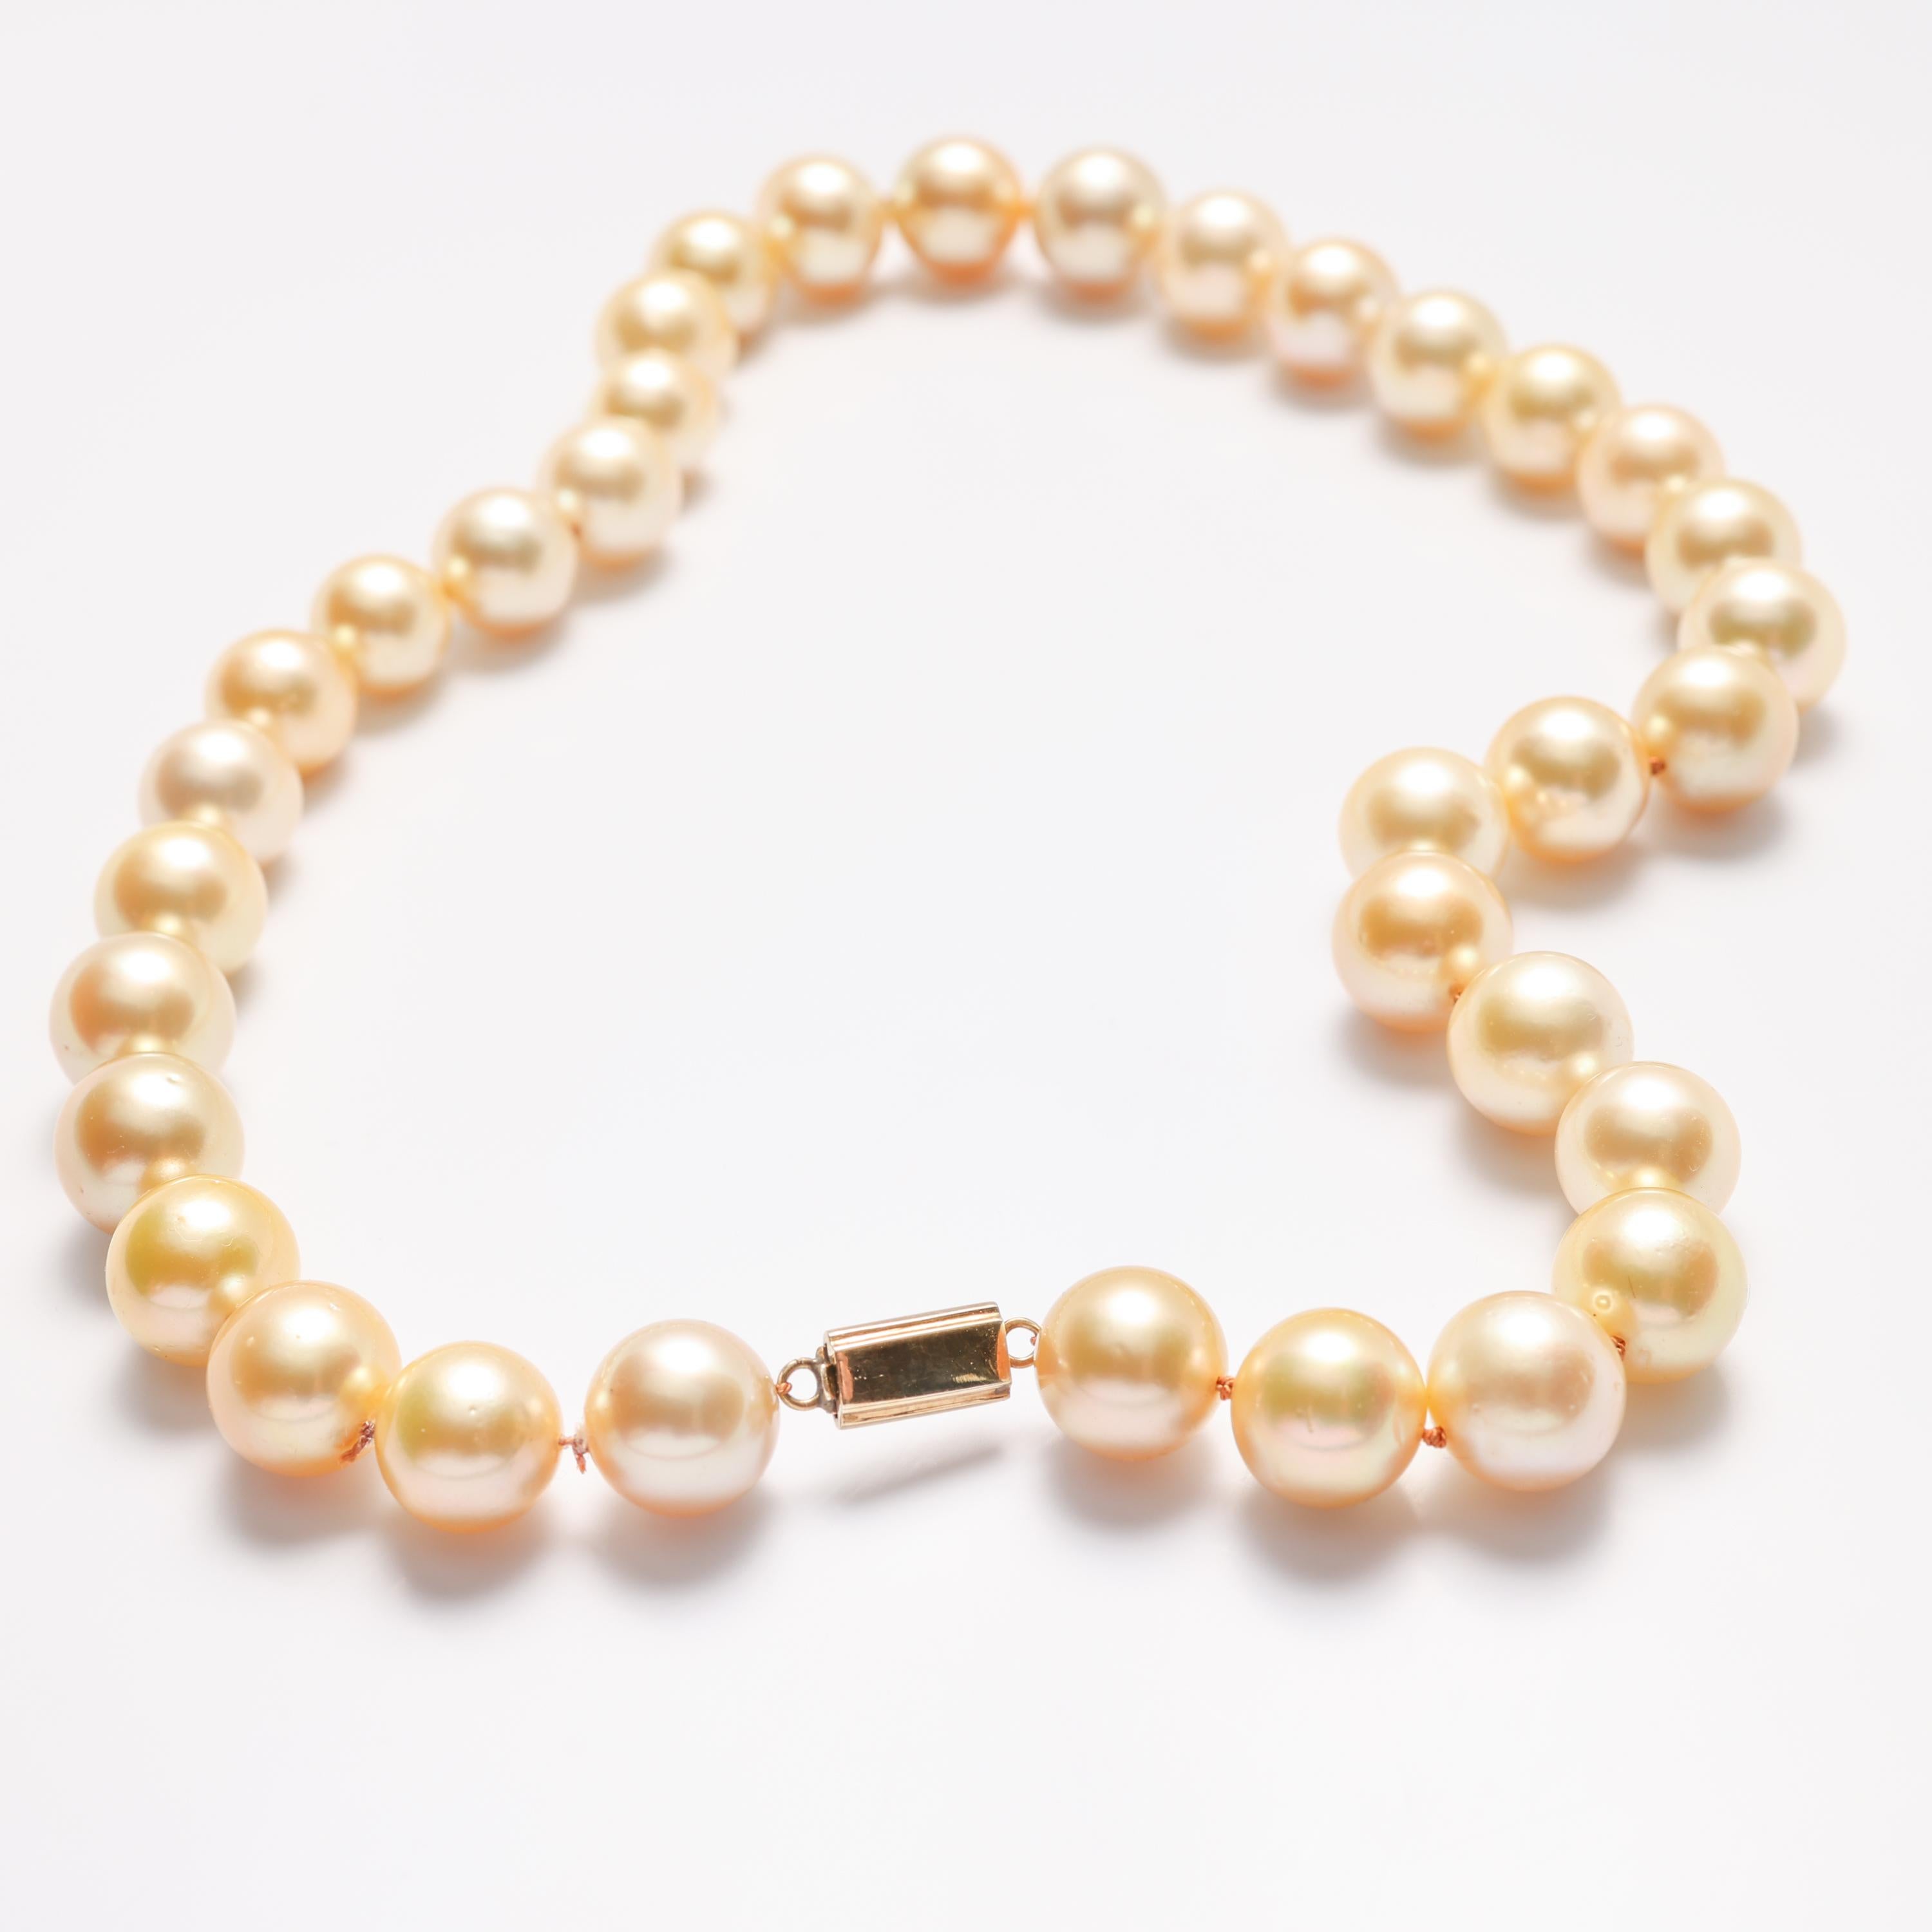 Thirty-five luminous and golden South Sea pearls compose an 18